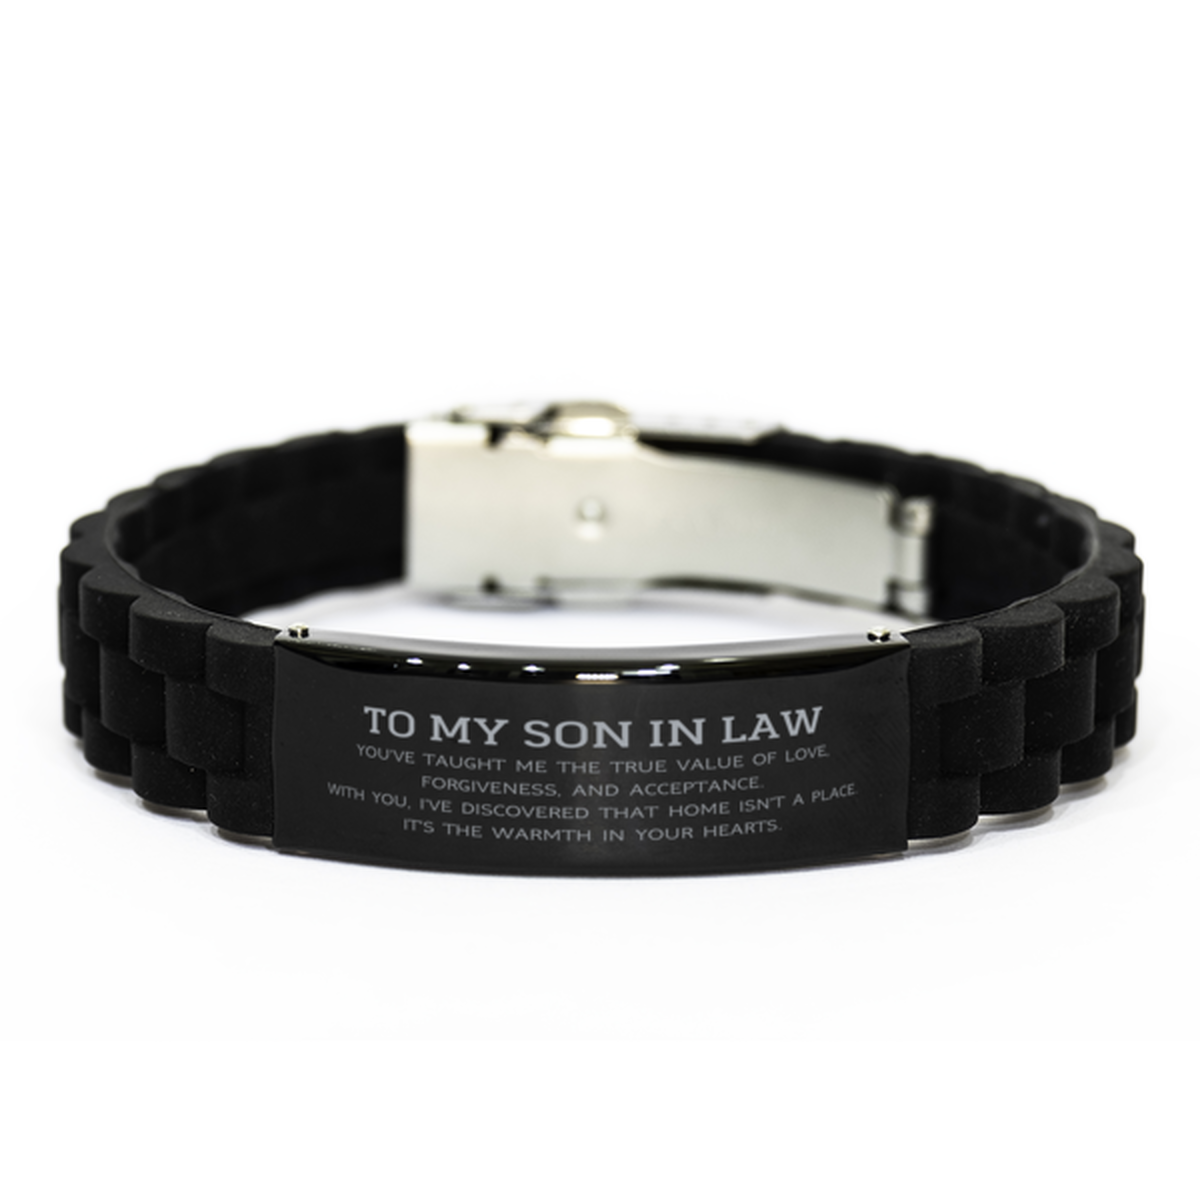 To My Son In Law Gifts, You've taught me the true value of love, Thank You Gifts For Son In Law, Birthday Black Glidelock Clasp Bracelet For Son In Law